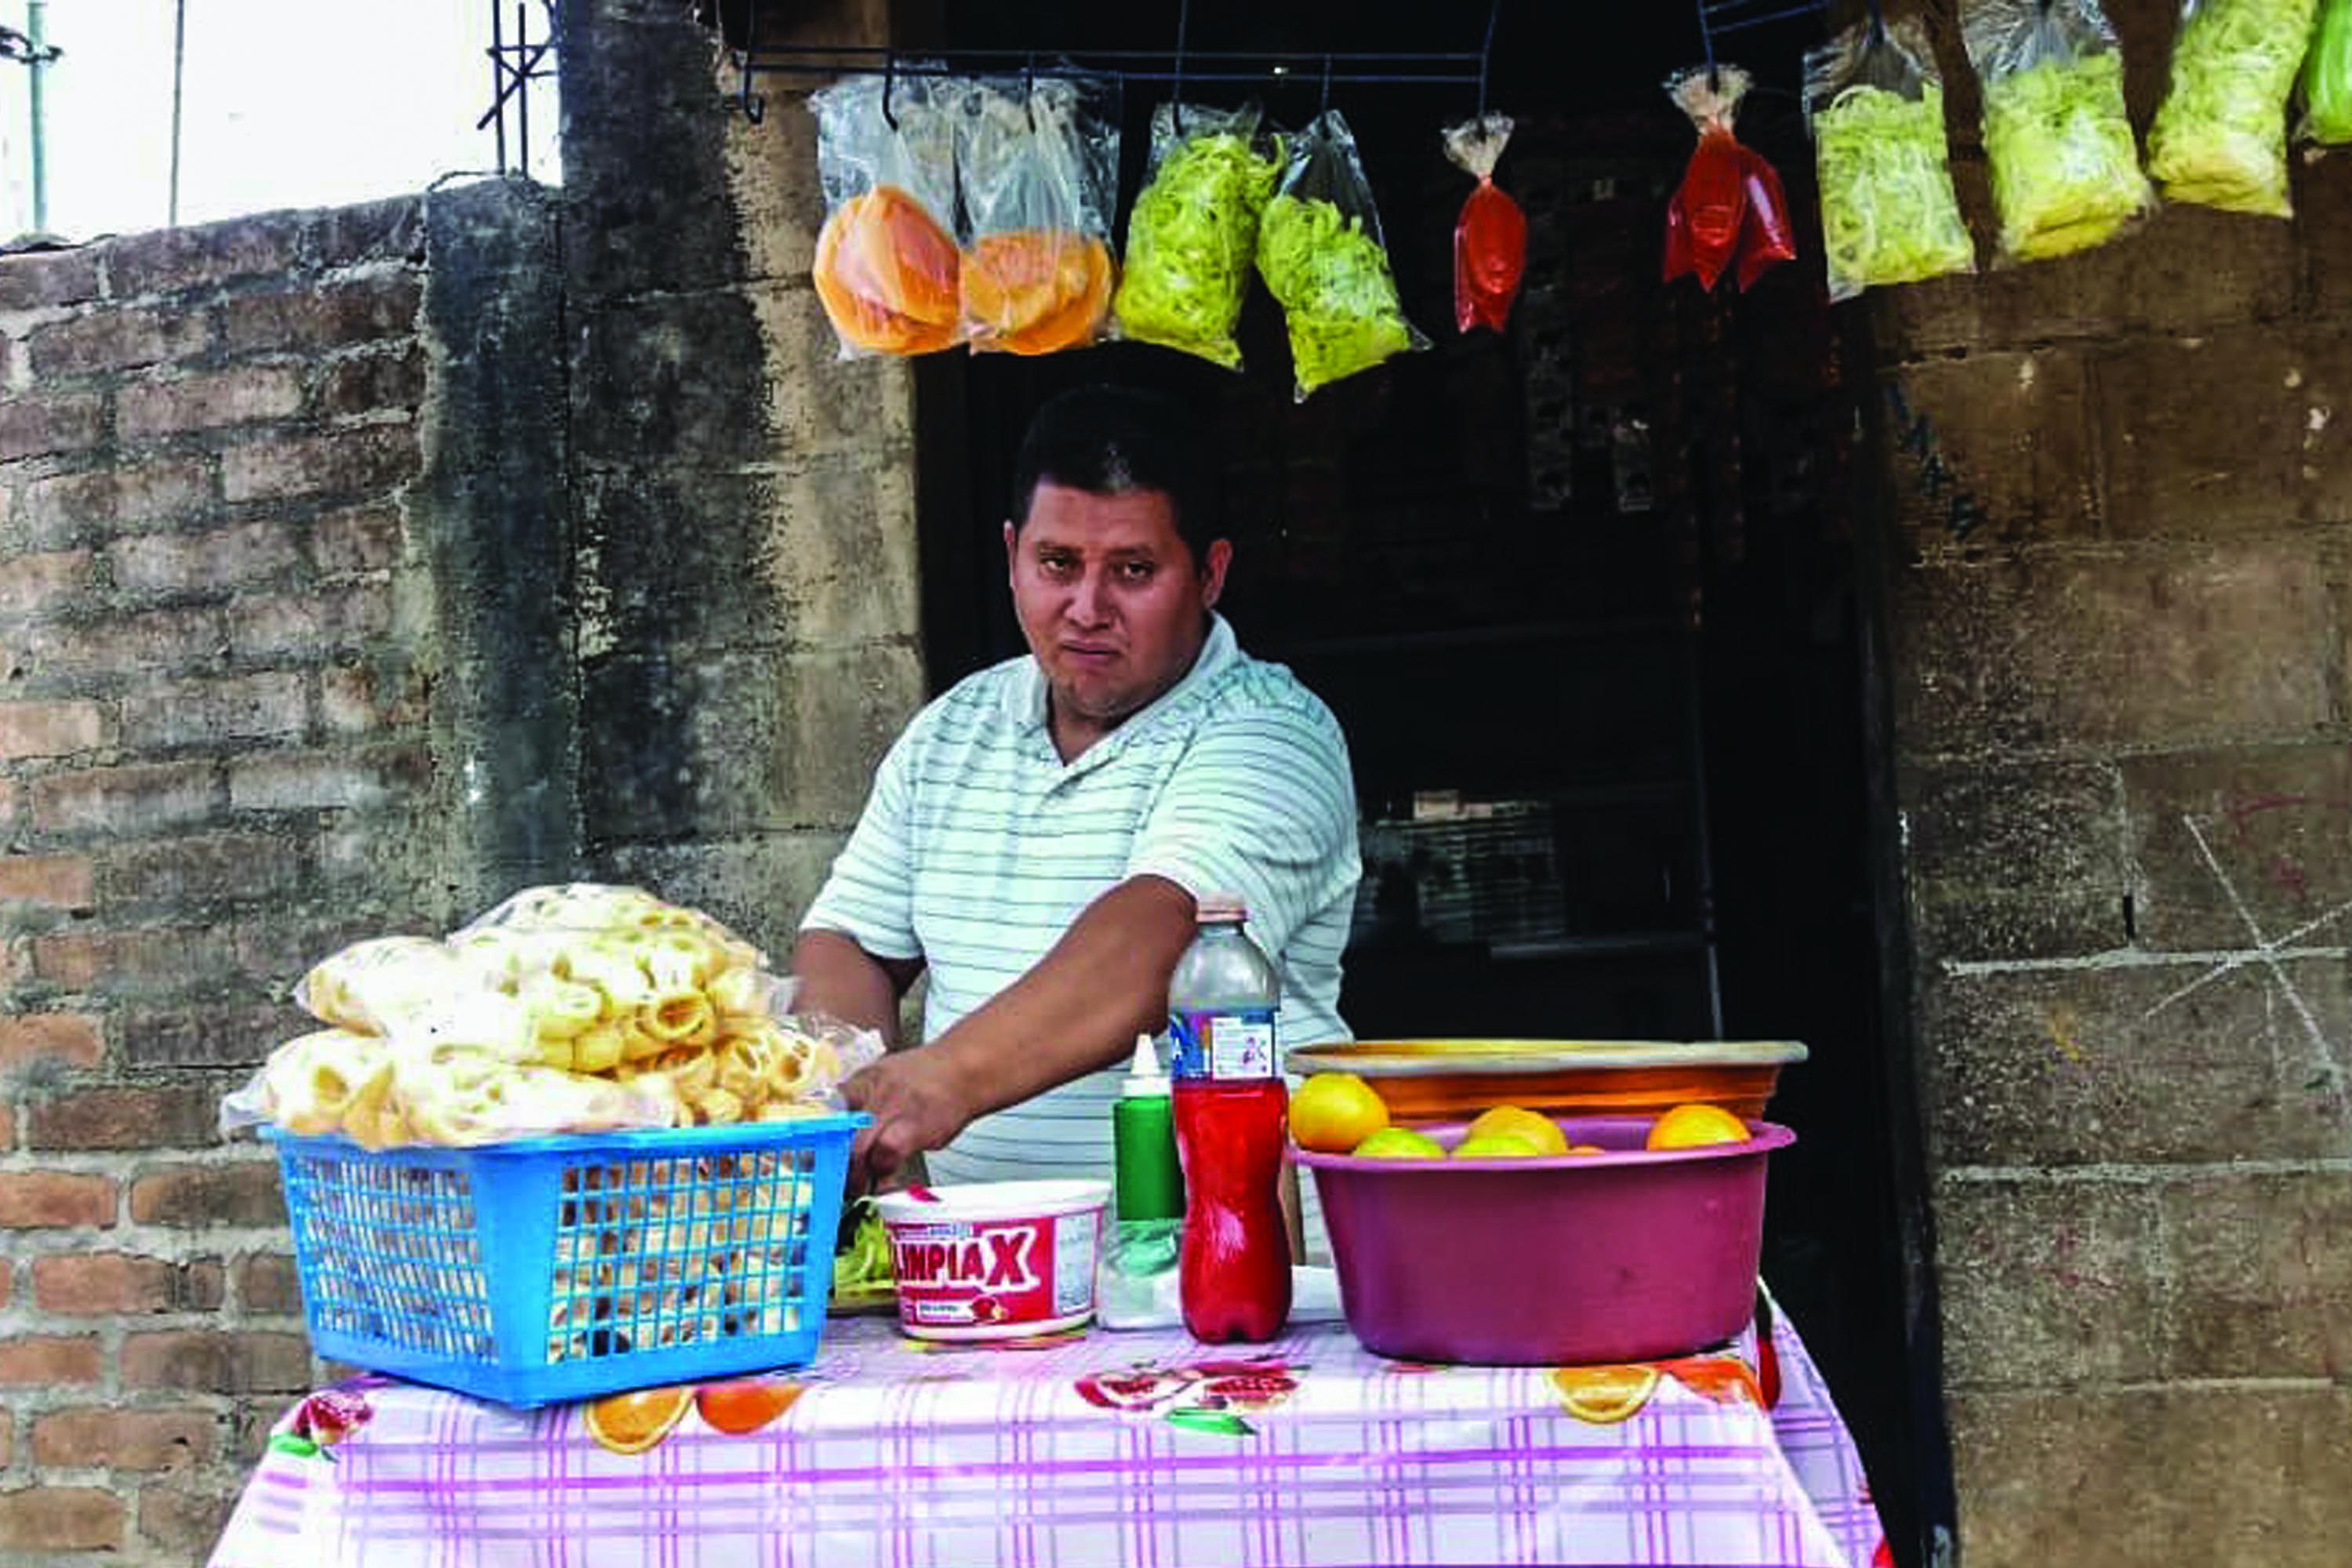 José Alfredo Grande is a bricklayer who also ran a fruit and lunch stand in the community. Photo: Courtesy